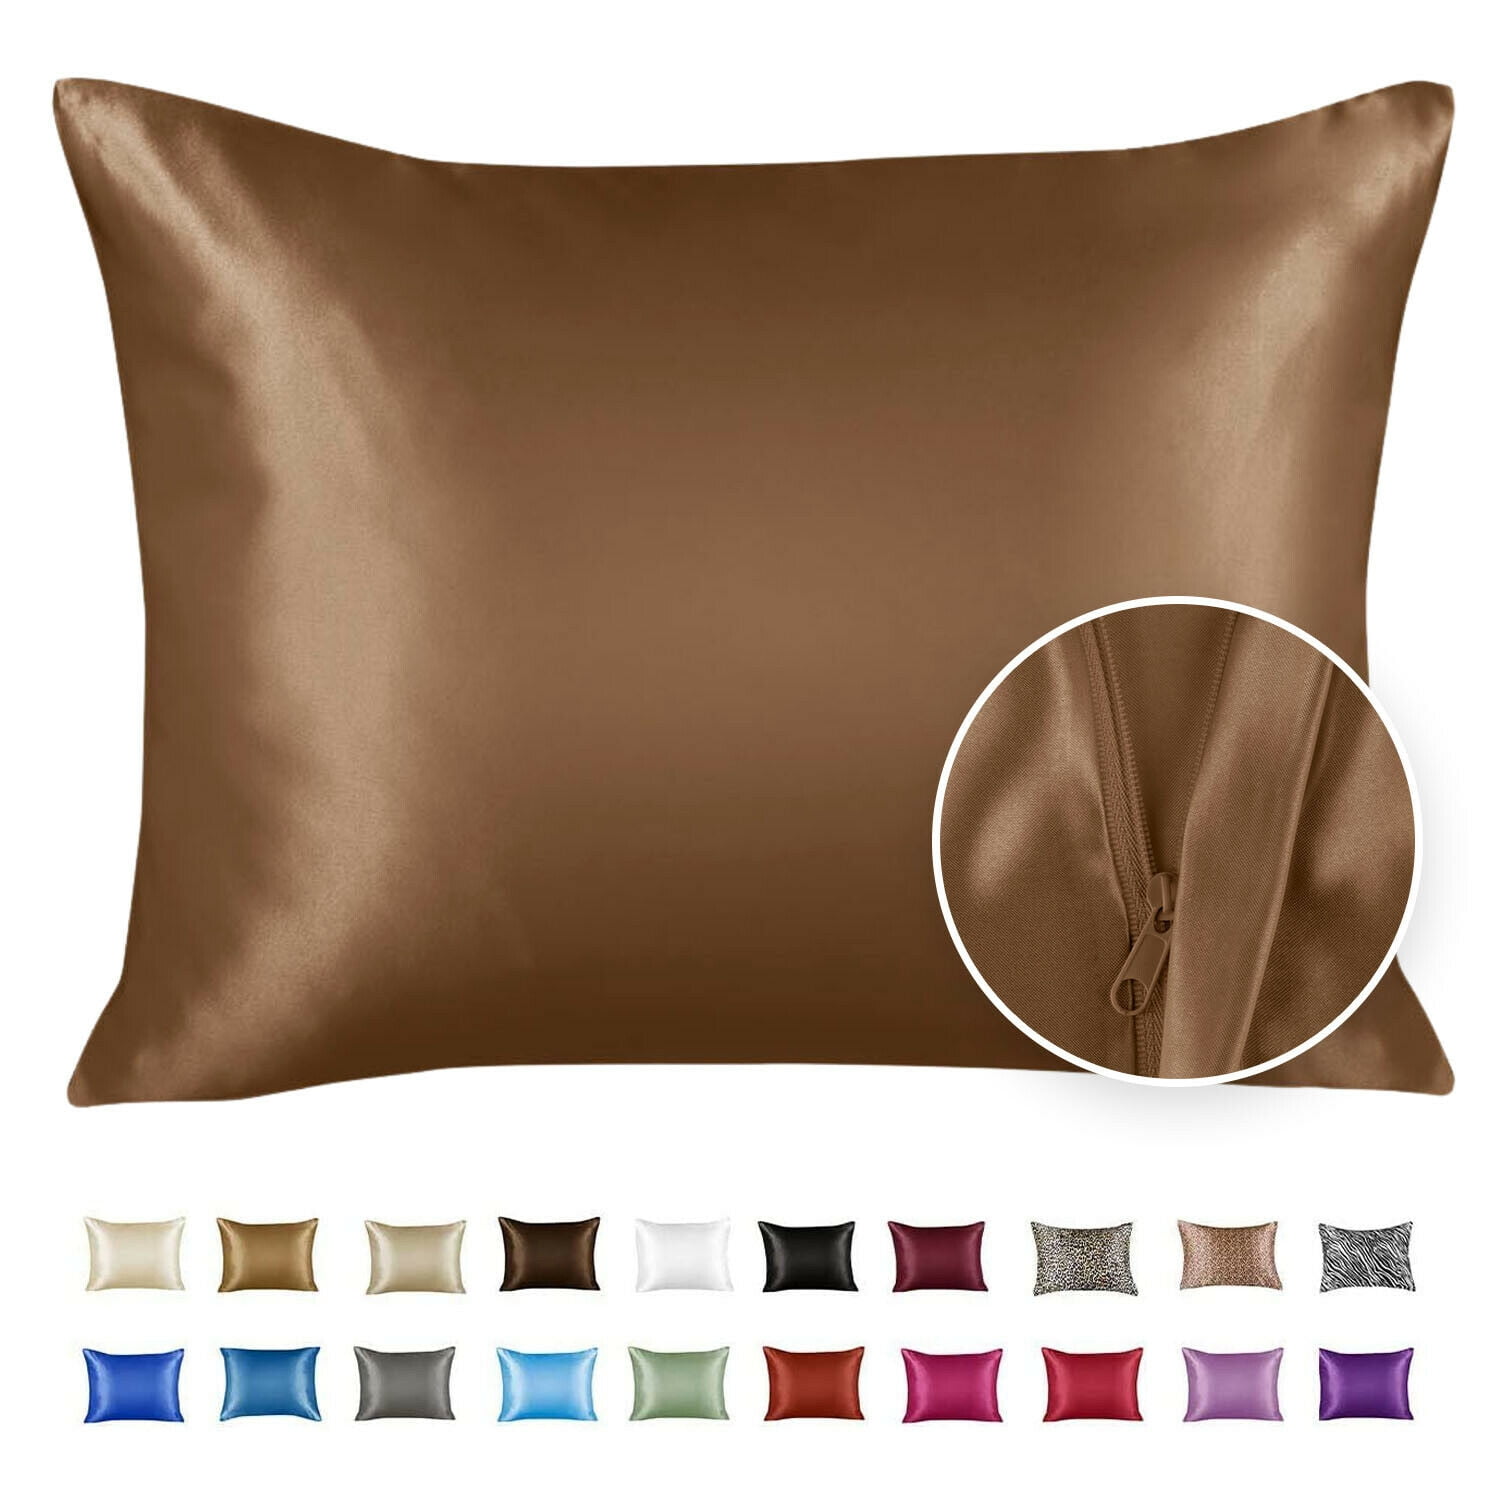 Silk Satin Pillowcase 1 Pack Silky Pillow Cases For Hair And Skin Cushion Cover 